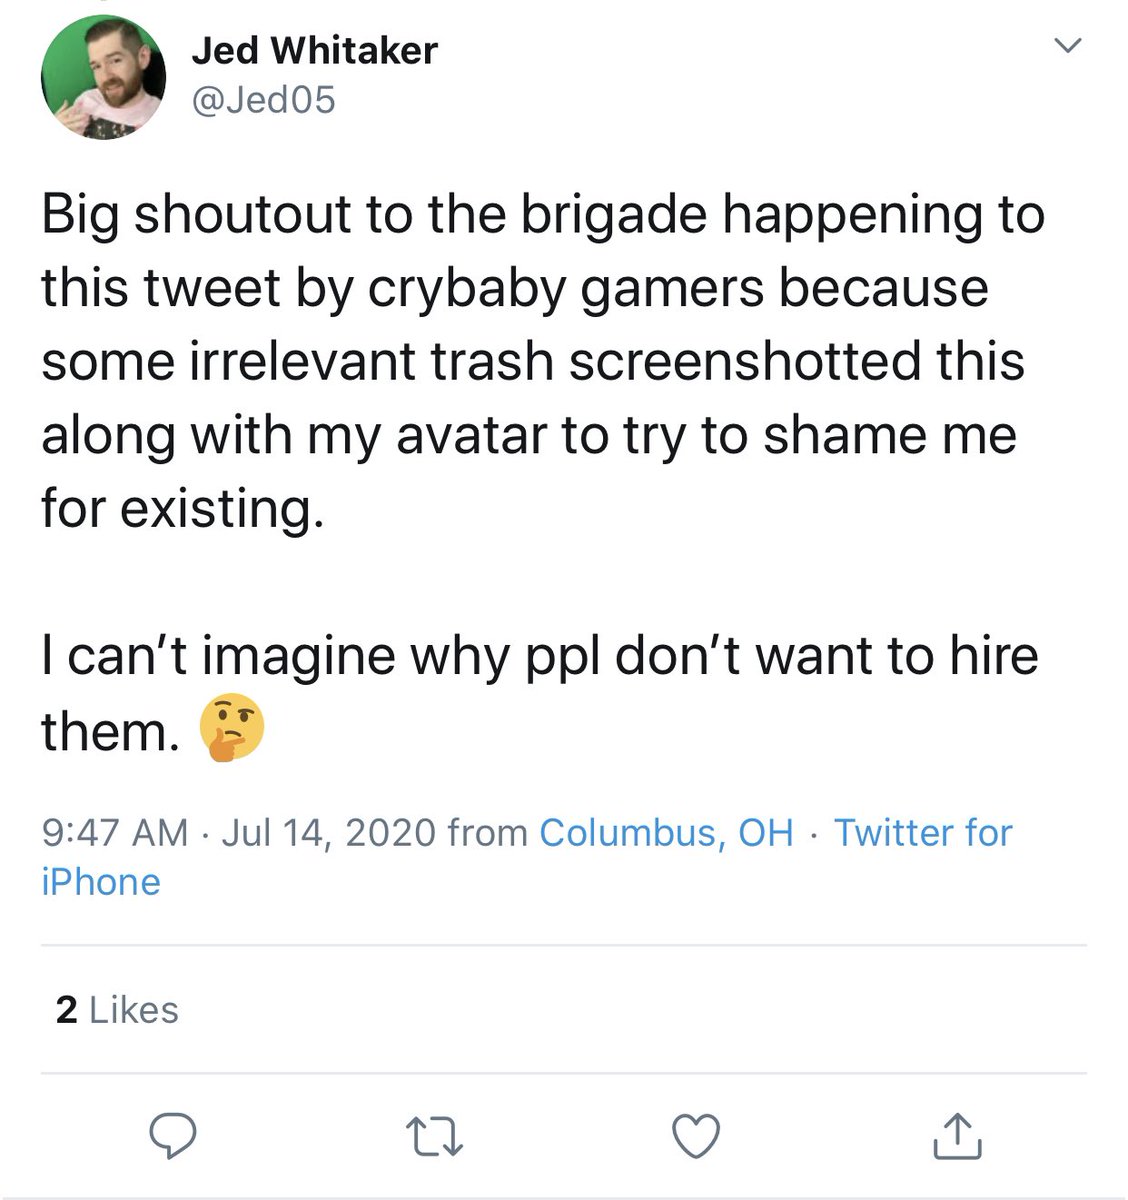 Hey  @jed05, calling me irrelevant is bold considering I have 37,394 more followers than you, I occasionally break big stories, & my riot coverage got 11million+ views on twitter. Your claim to fame is shoving Joycons up your ass & seemingly DMCA’ing me to give bad actors my addy  https://twitter.com/sophnar0747/status/1268552361011810304